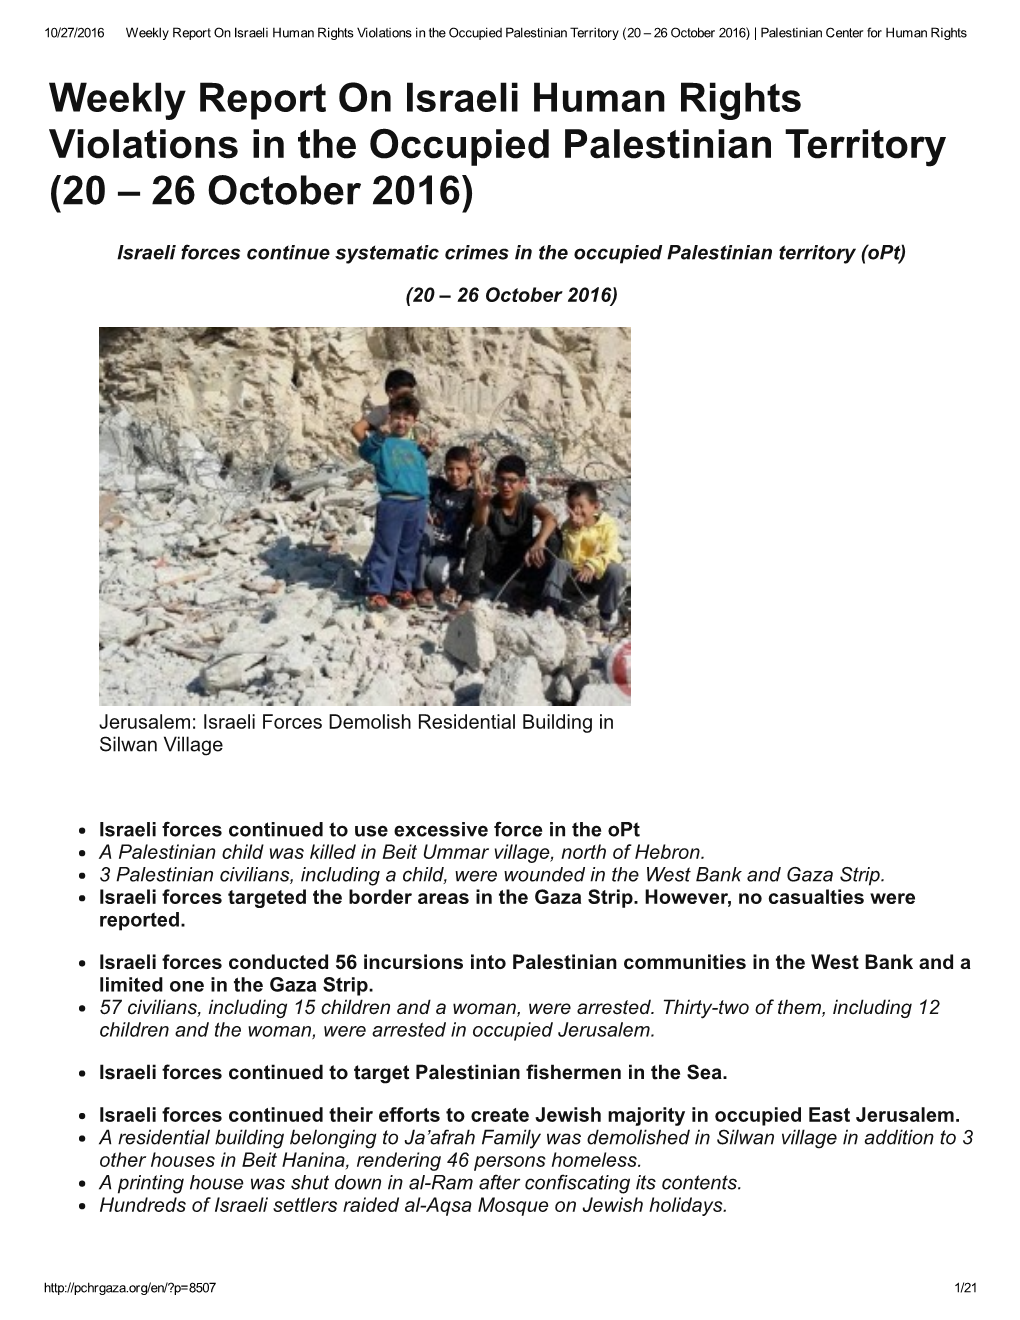 Weekly Report on Israeli Human Rights Violations in The